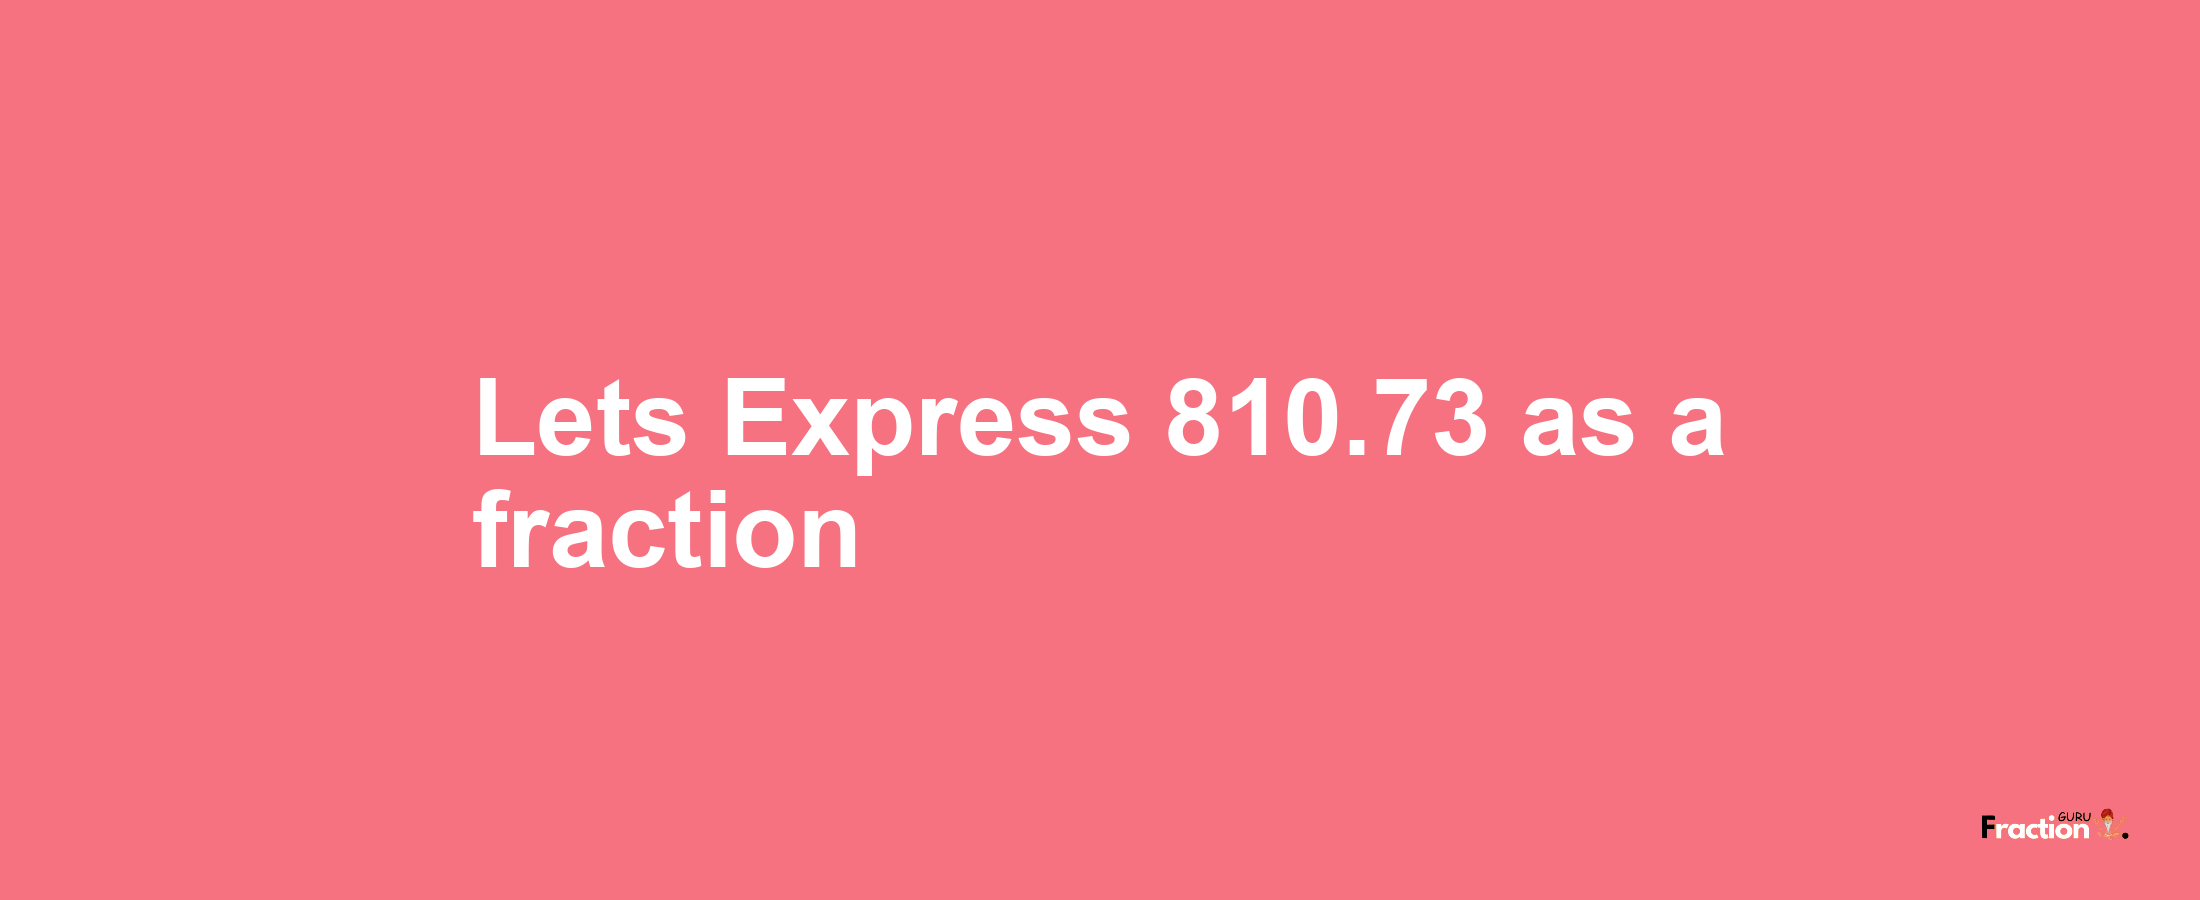 Lets Express 810.73 as afraction